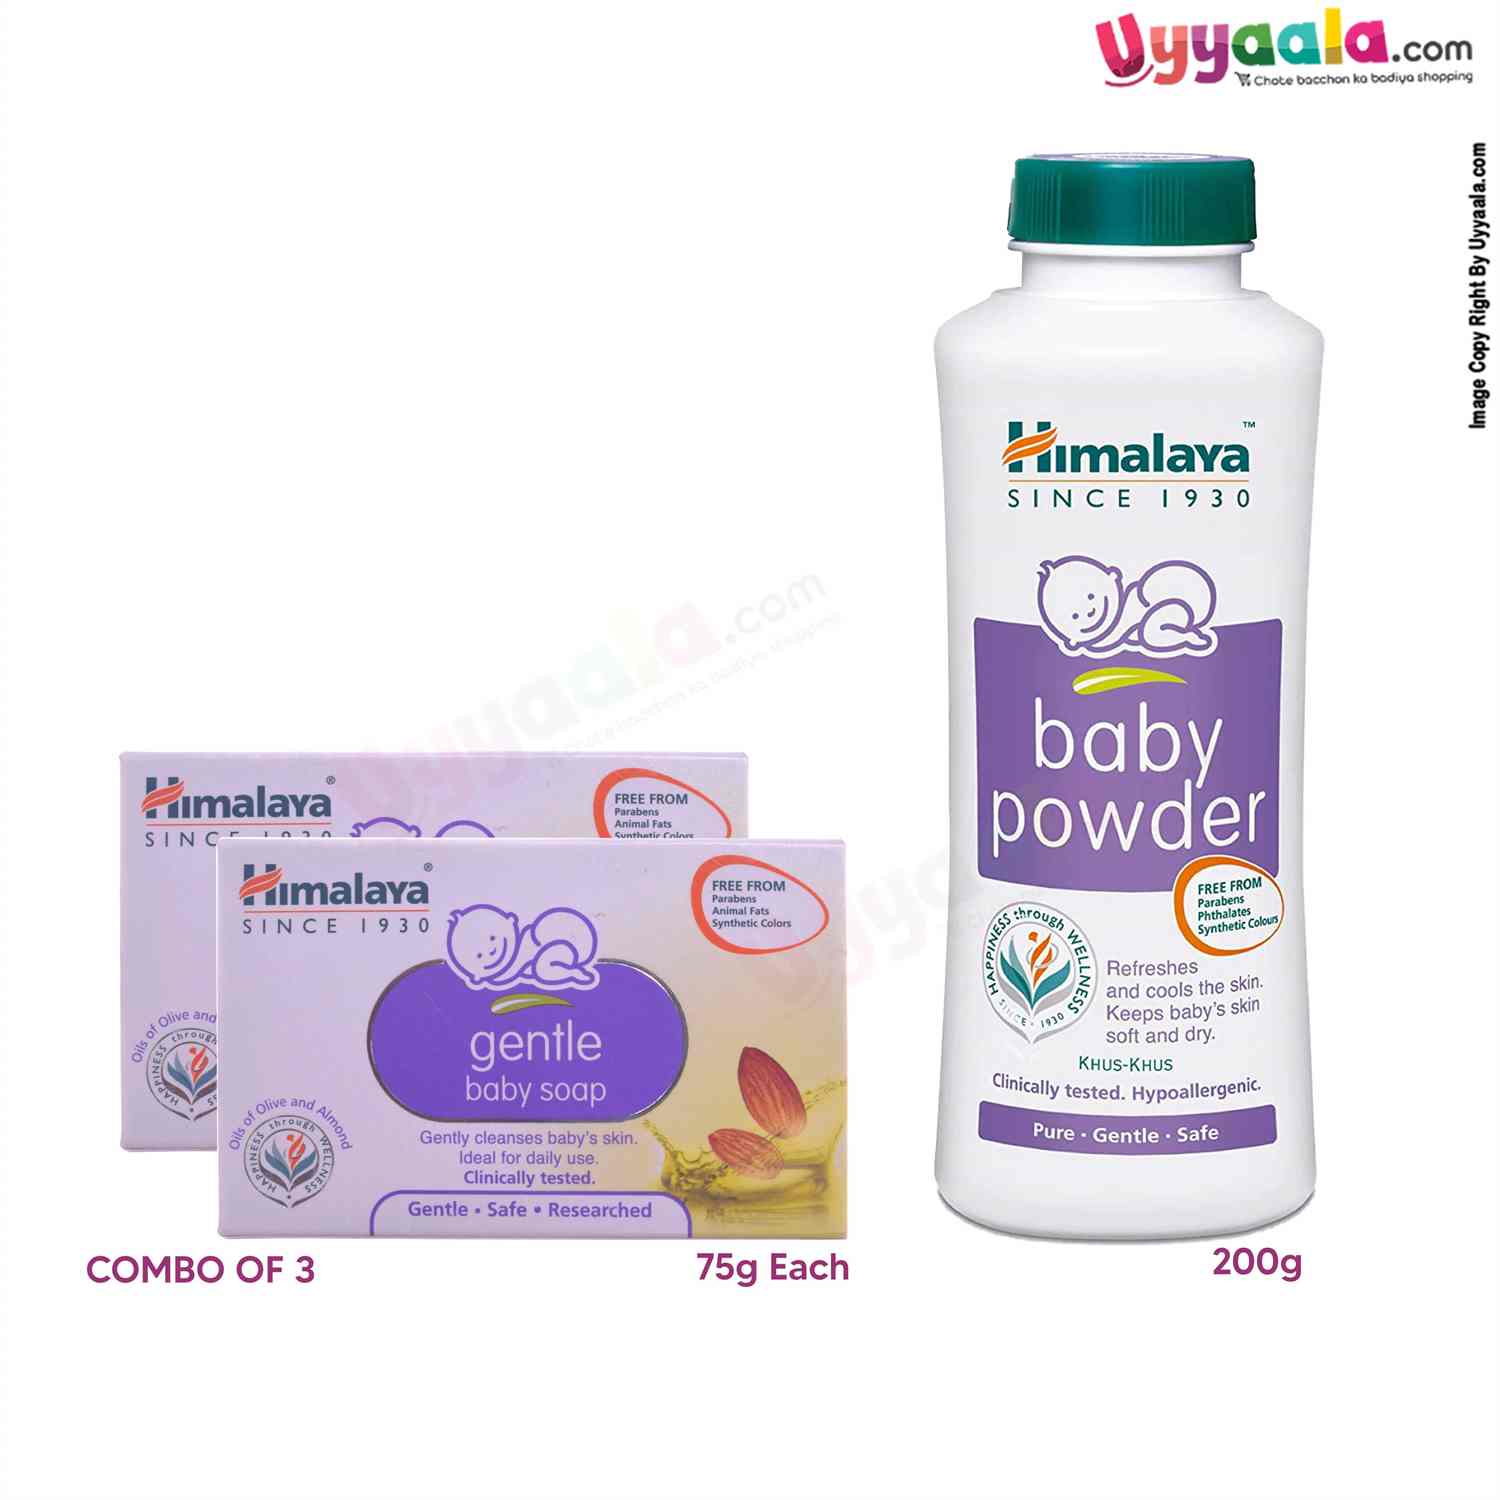 HIMALAYA Gentle Baby Soap Olive & Almond 75g Pack Of 2 & Baby Powder 200g (Combo Pack)